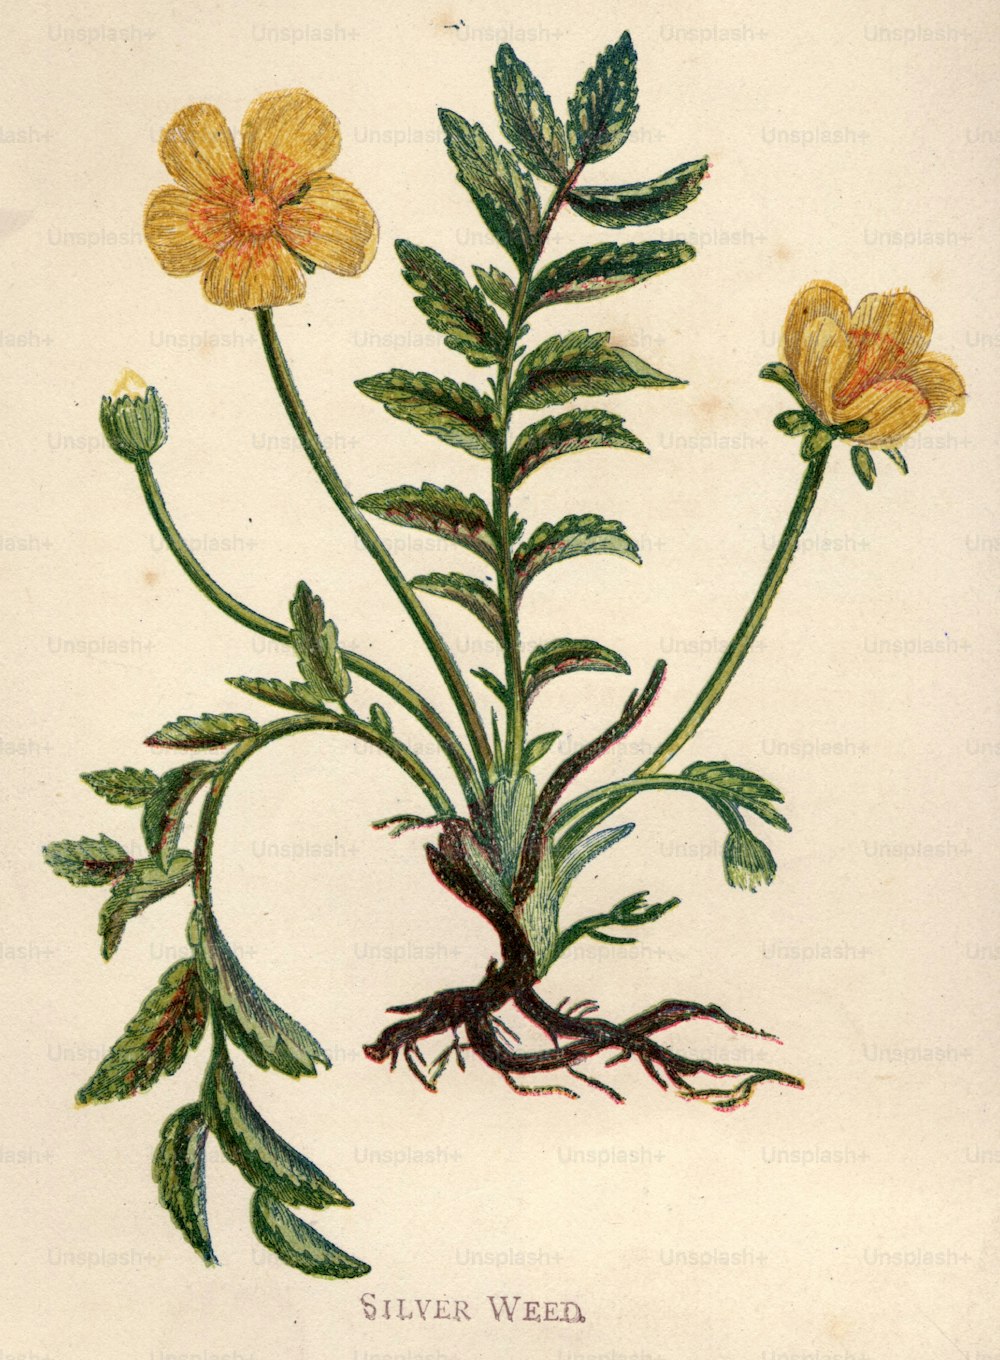 circa 1800:  The yellow flowers of silver weed.  (Photo by Hulton Archive/Getty Images)